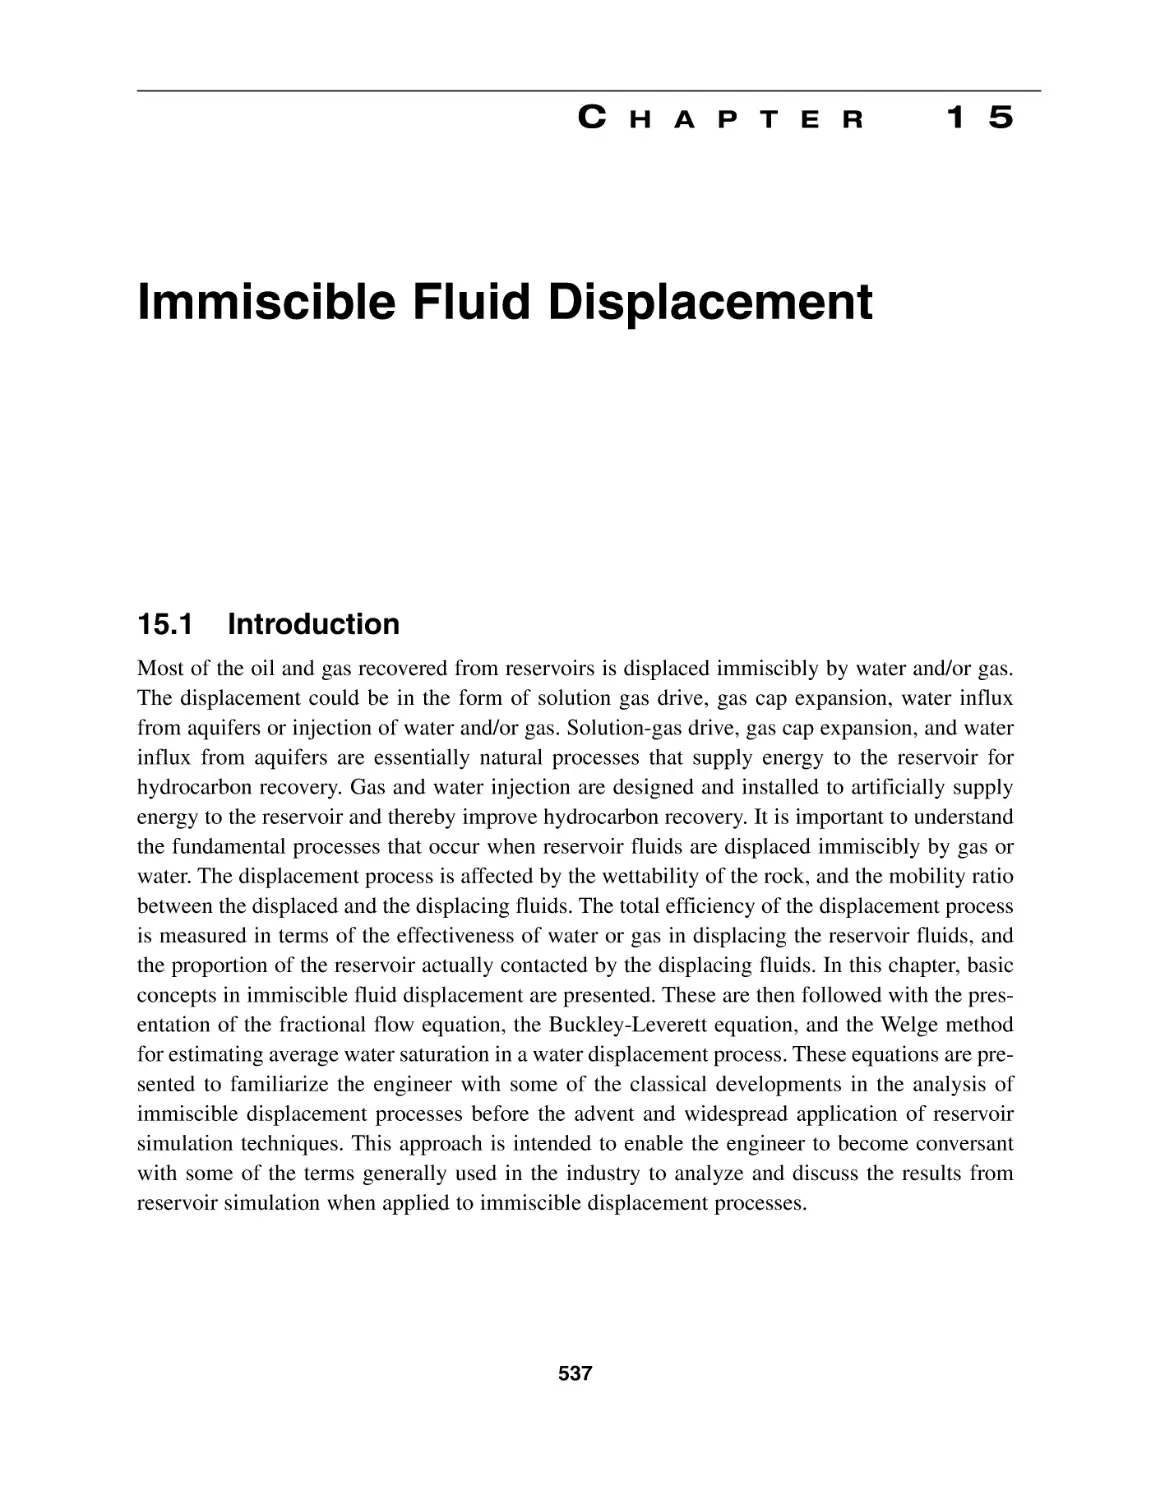 Chapter 15 Immiscible Fluid Displacement
15.1 Introduction